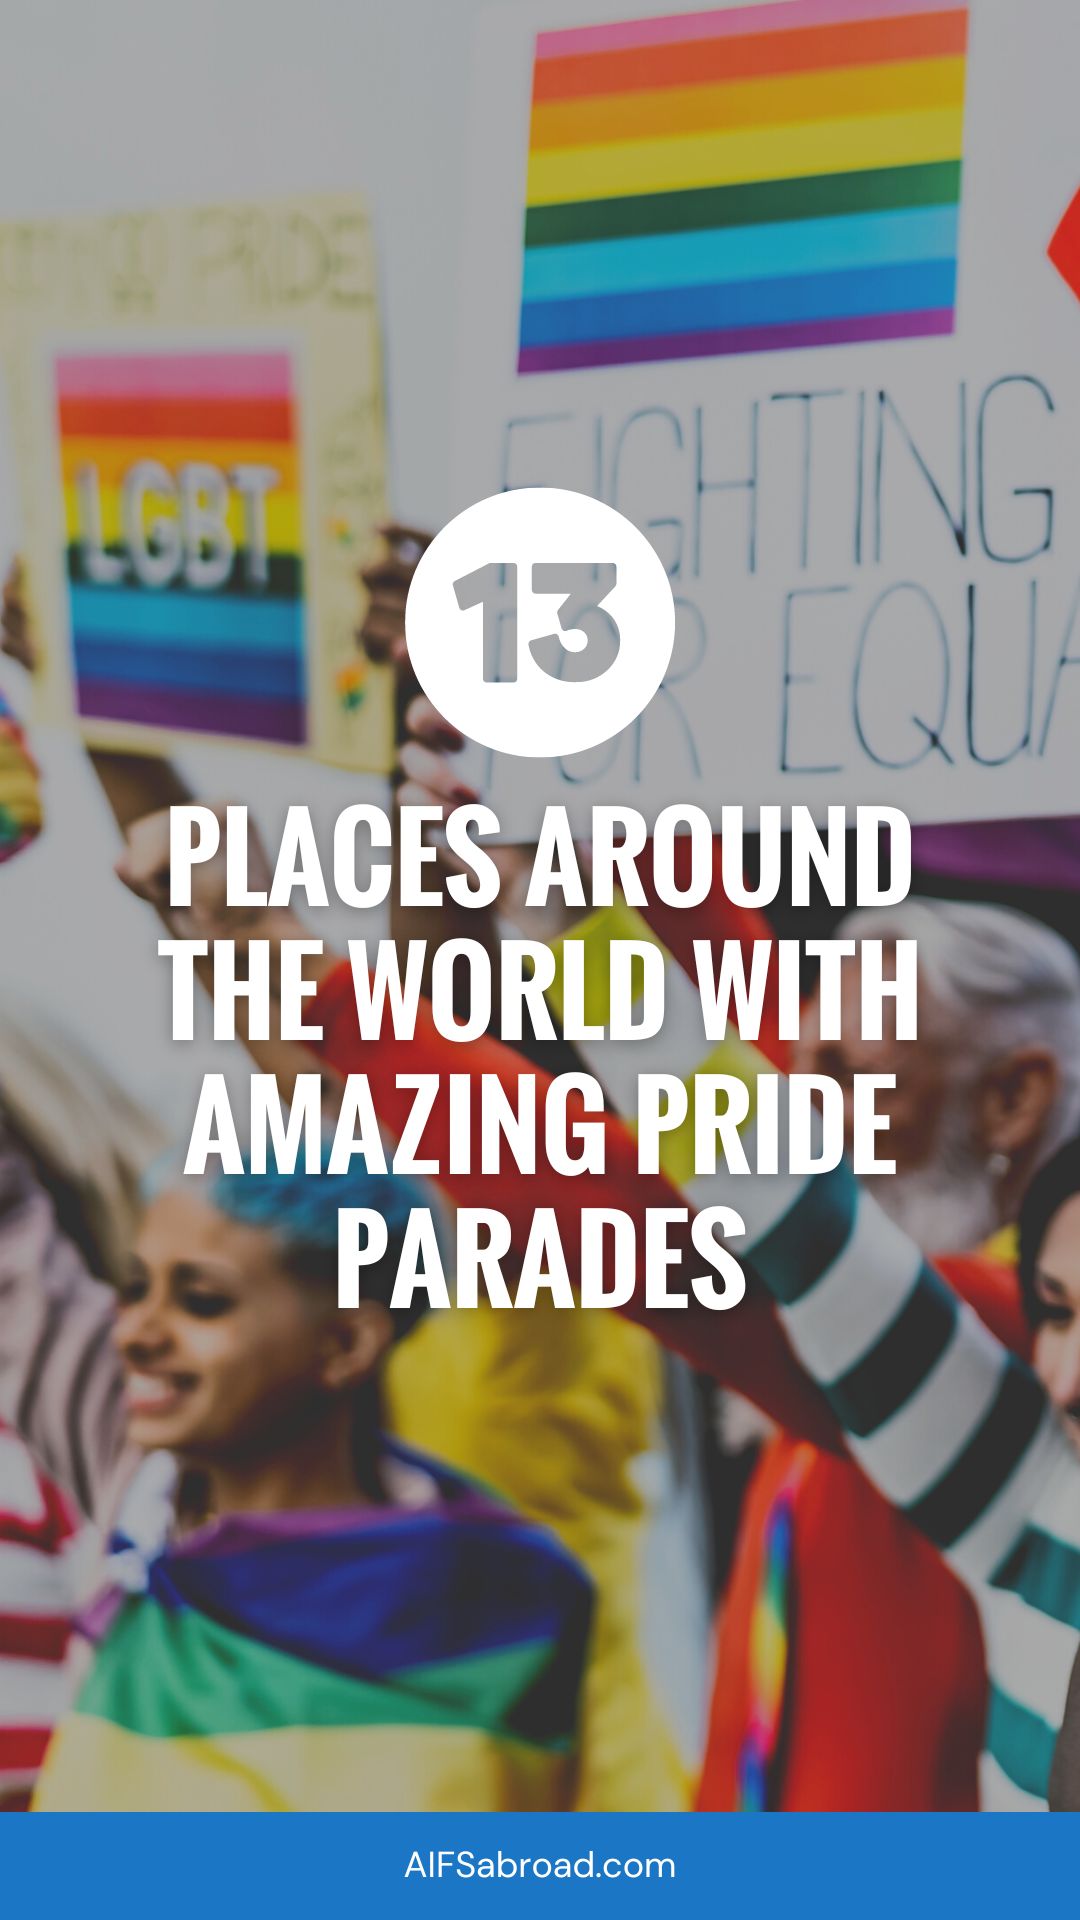 Pin image: Text saying "13 places around the world with amazing pride parades" over an image of a Pride Parade